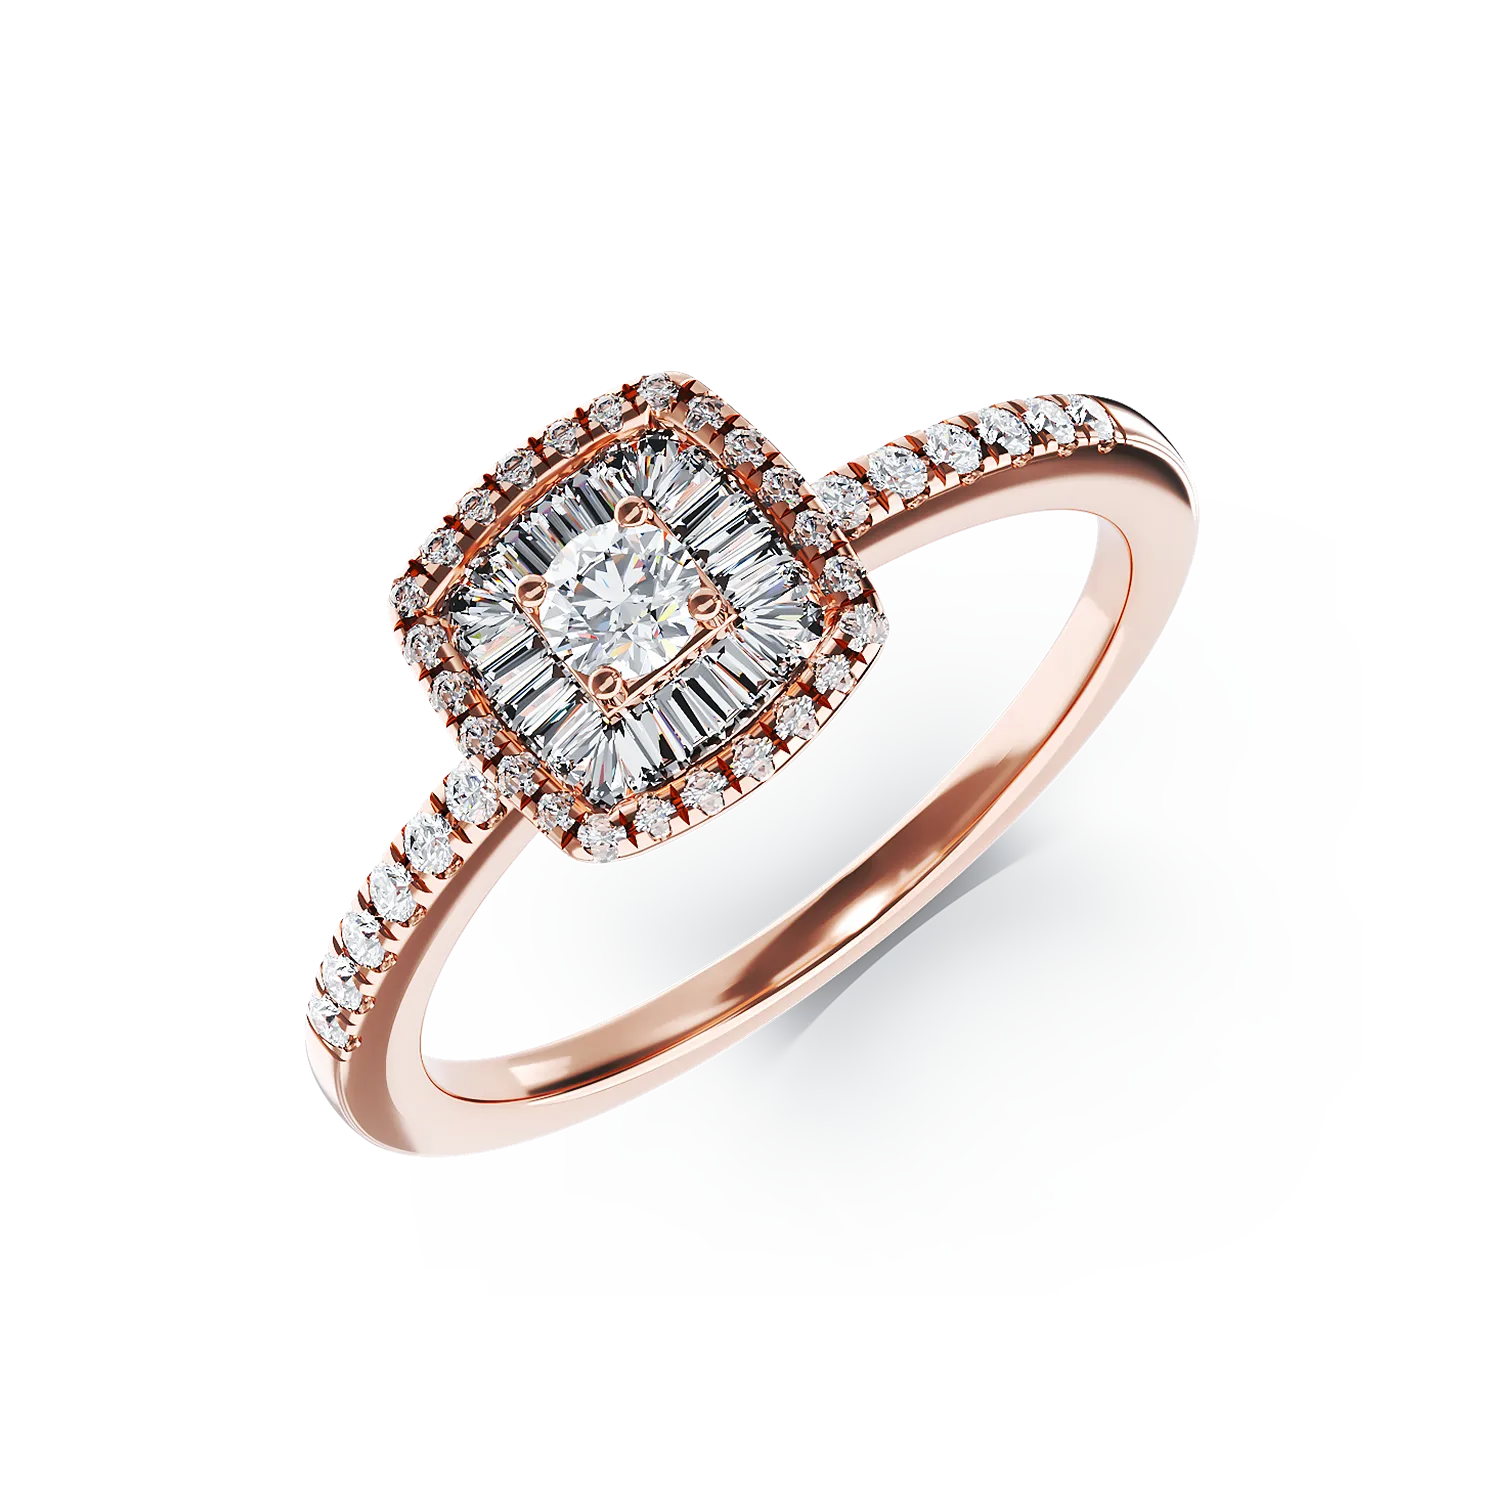 18K rose gold engagement ring with 0.38ct diamonds